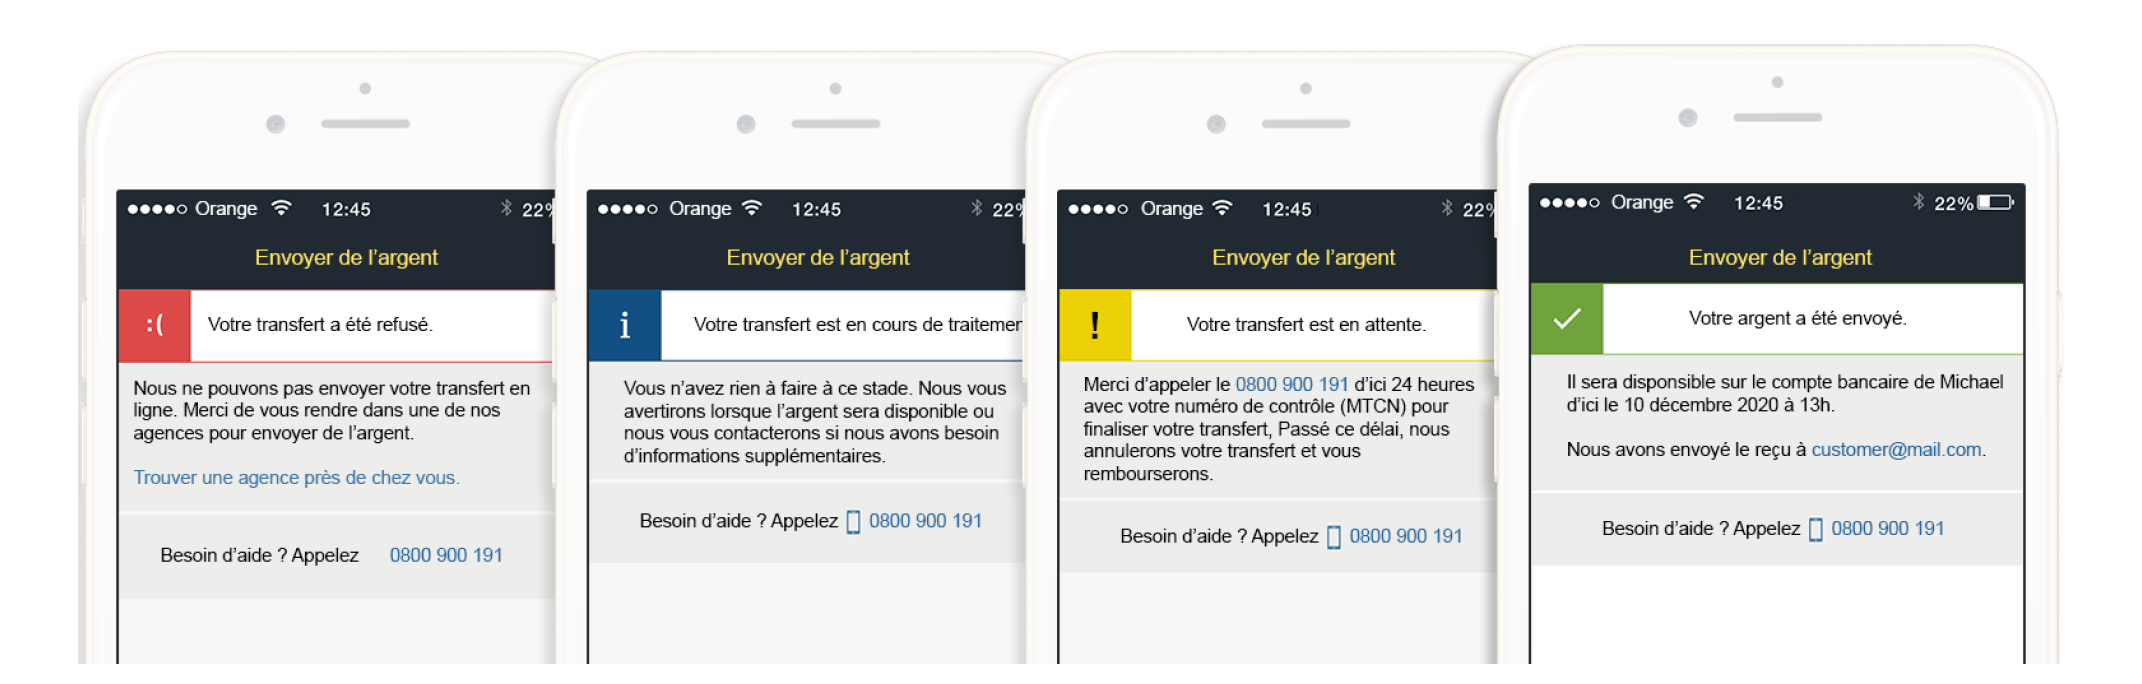 Status bars in French